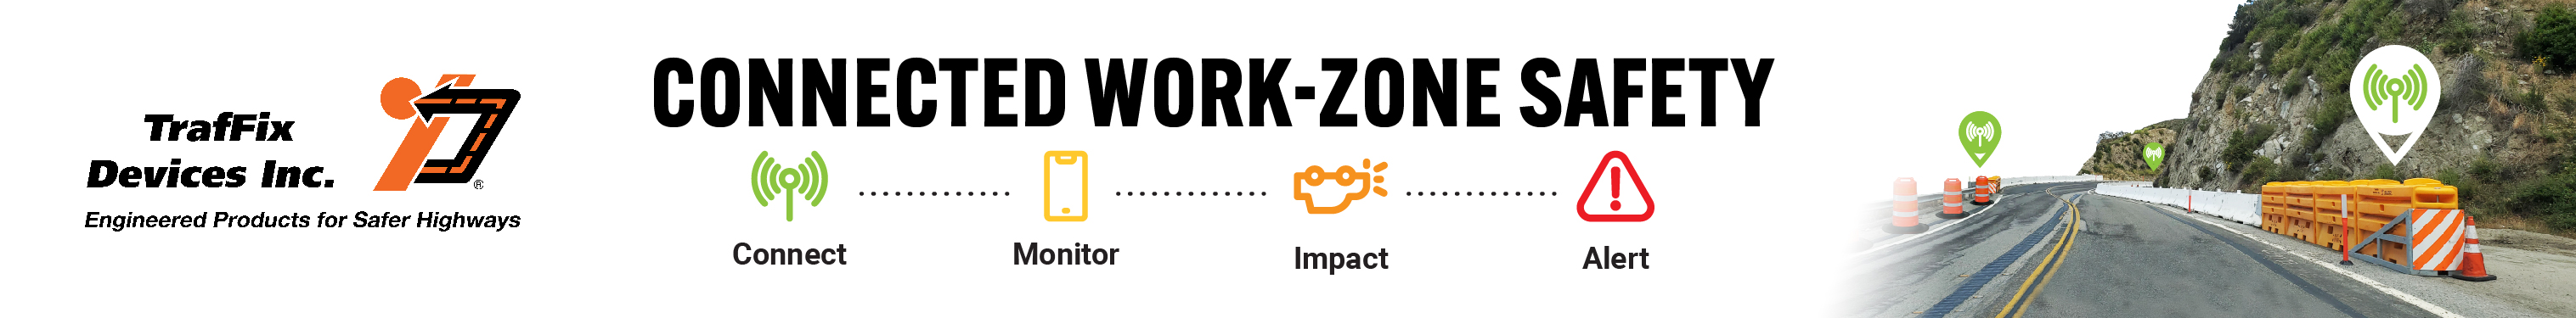 Sentinel - Connected Work-zone Safety